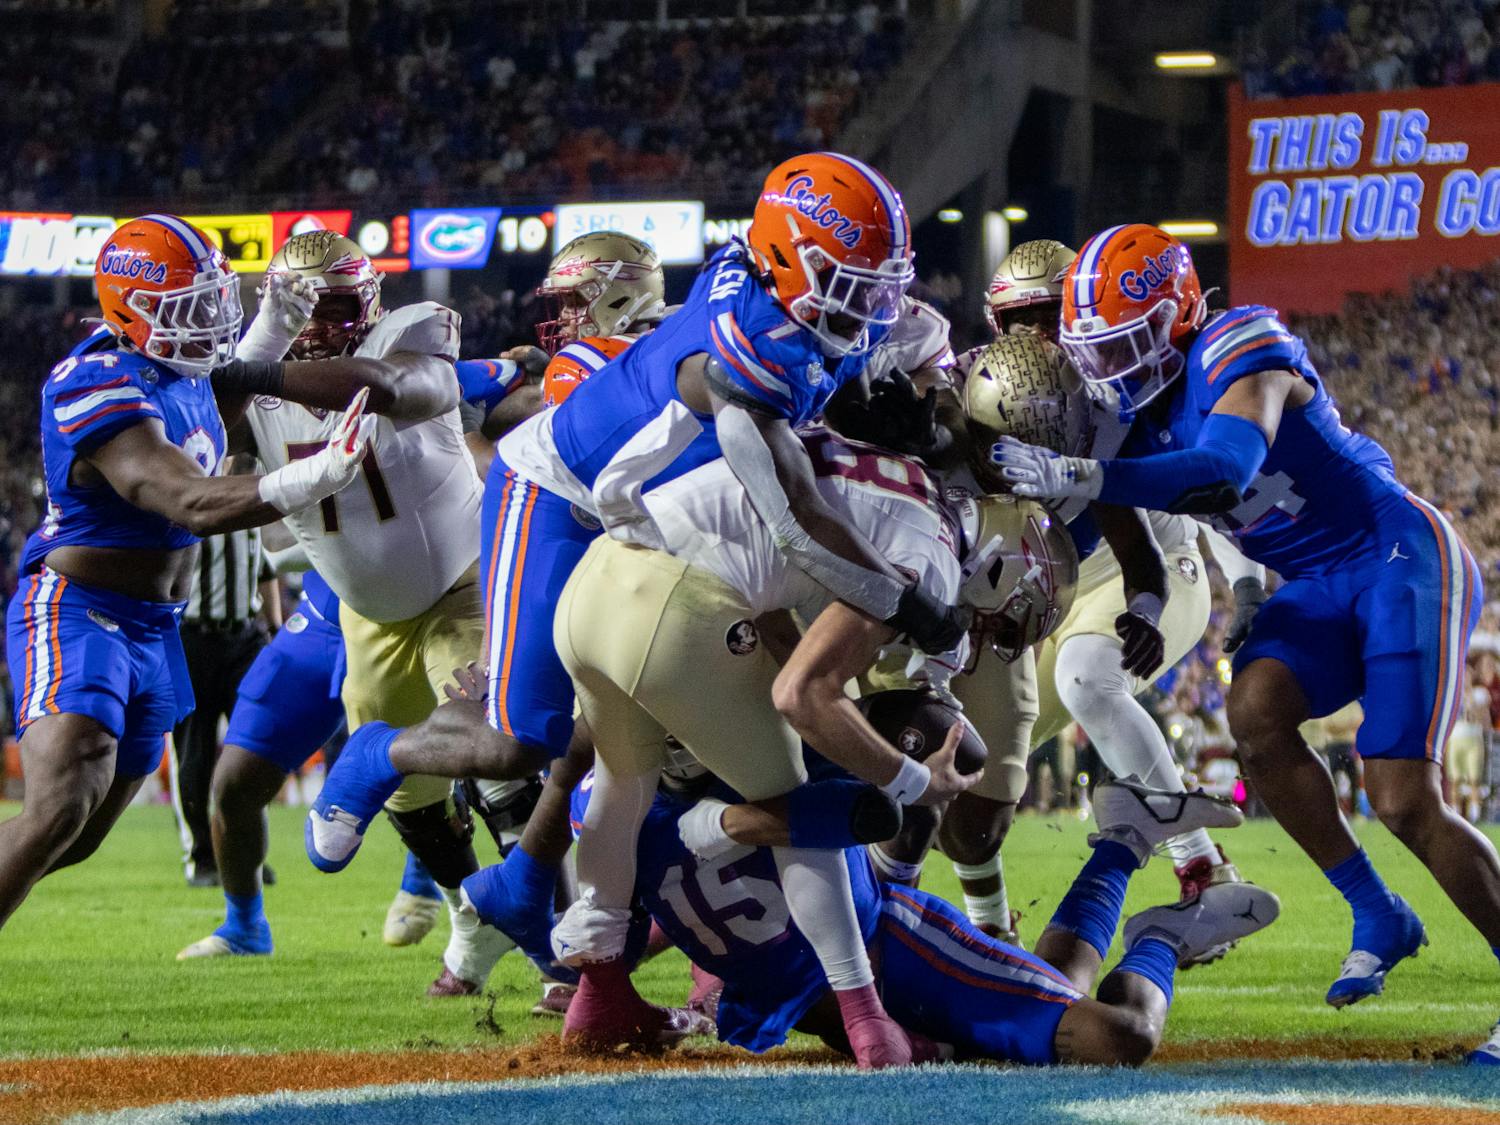 The Gators' defense sacks FSU quarterback Tate Rodemaker in the endzone for a safety in Florida's 24-15 loss to the Florida State Seminoles on Saturday, Nov. 25, 2023.